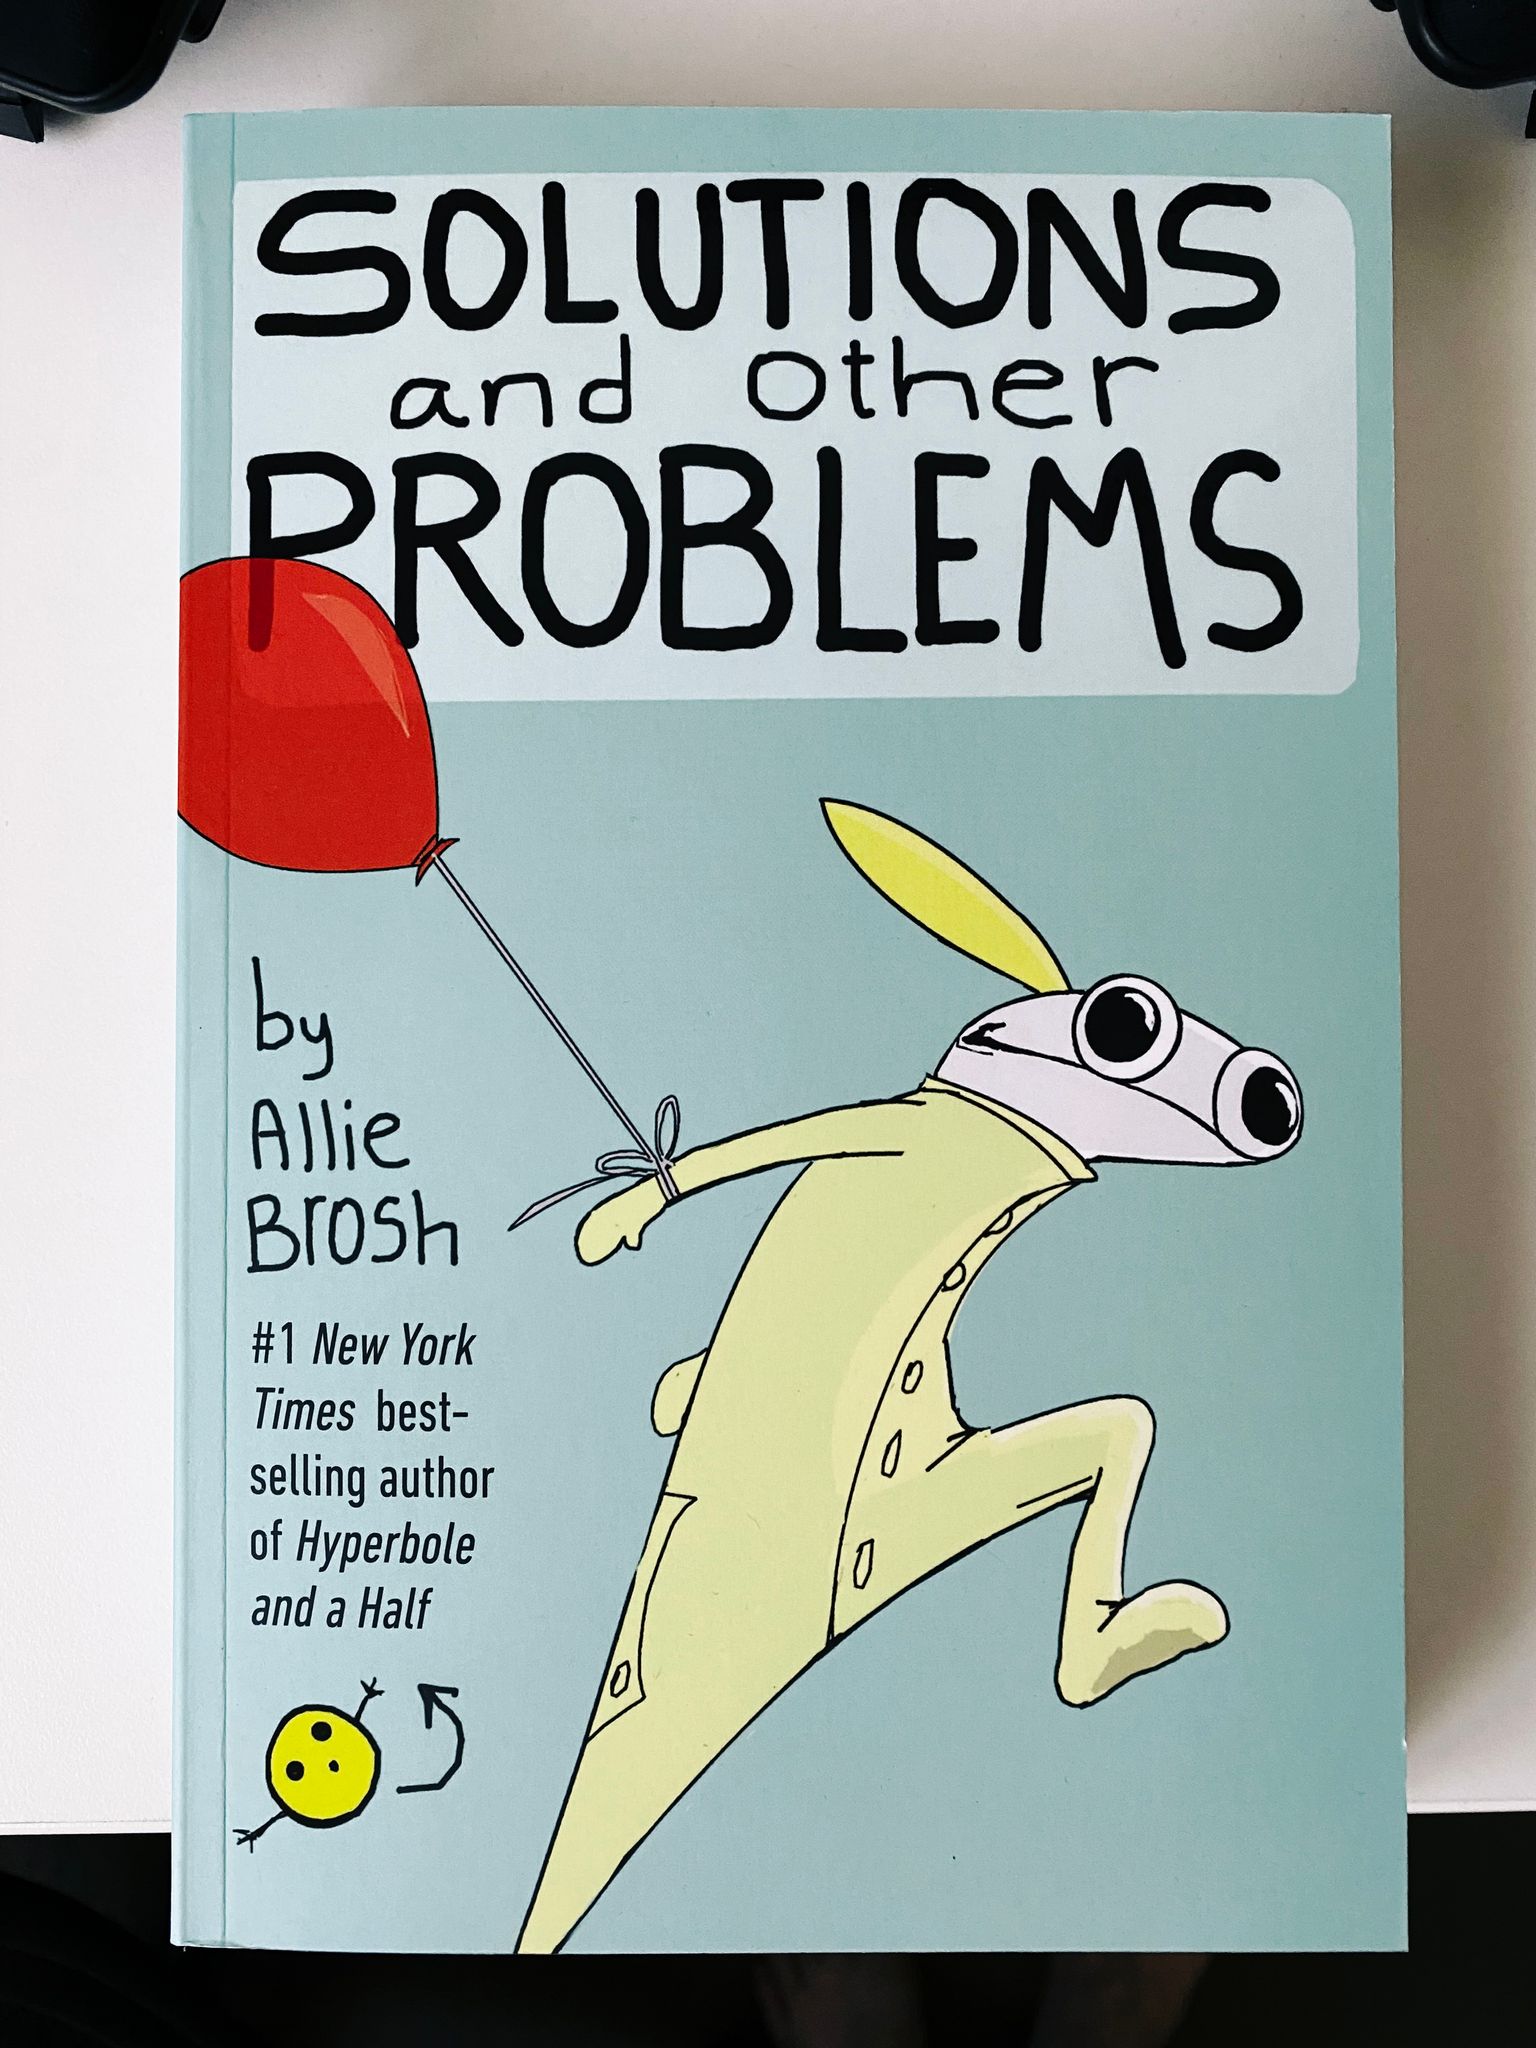 A photo of the cover of Allie Brosh's new book "Solutions And Other Problems".